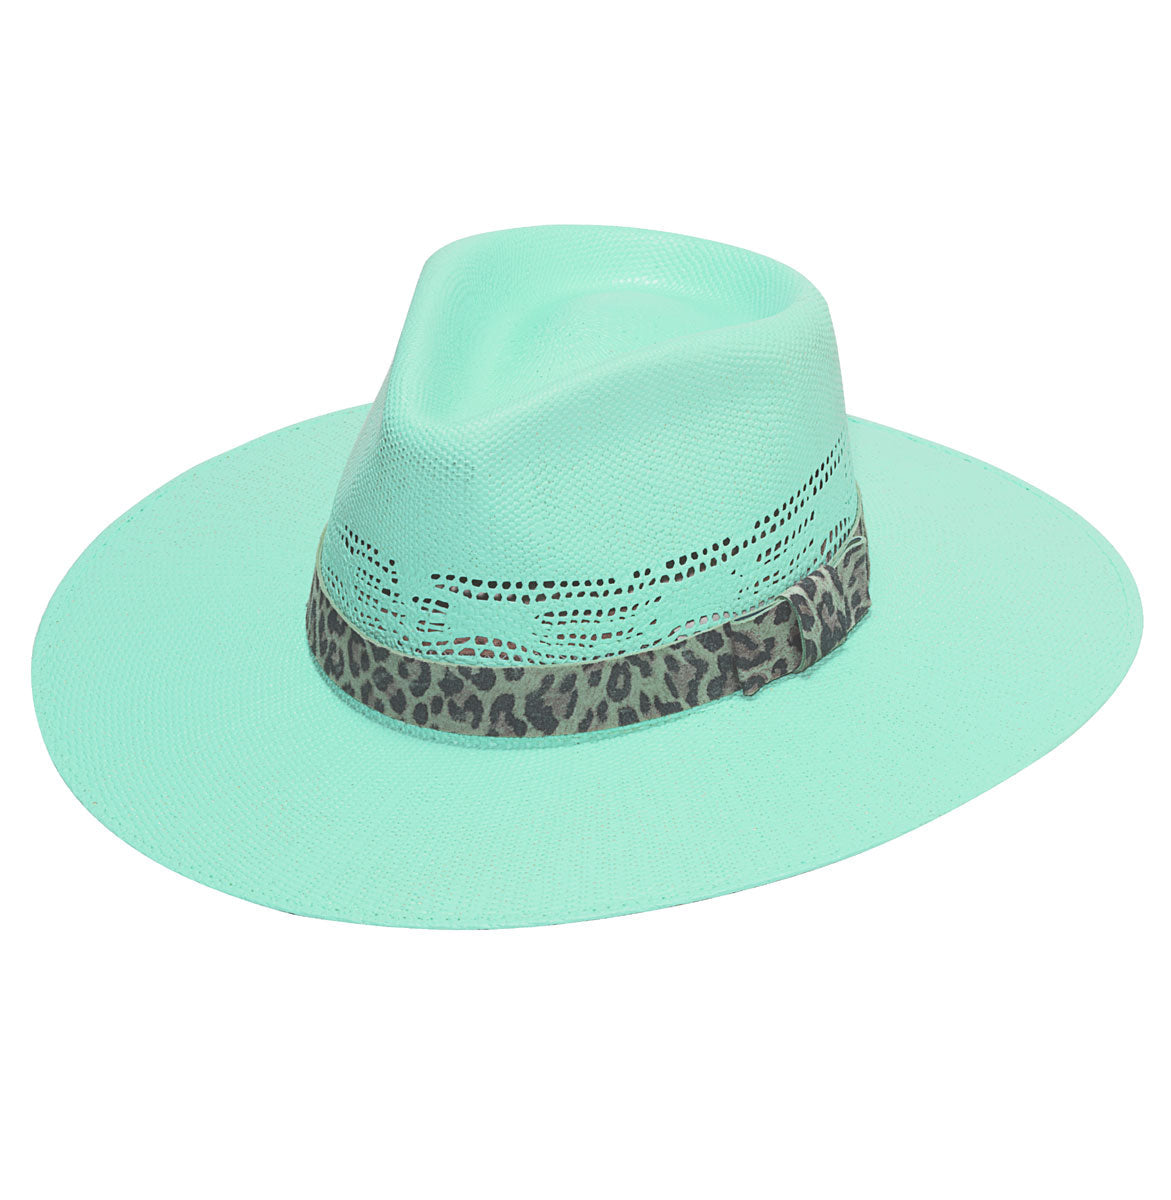 Twister Hat - Turquoise Leopard